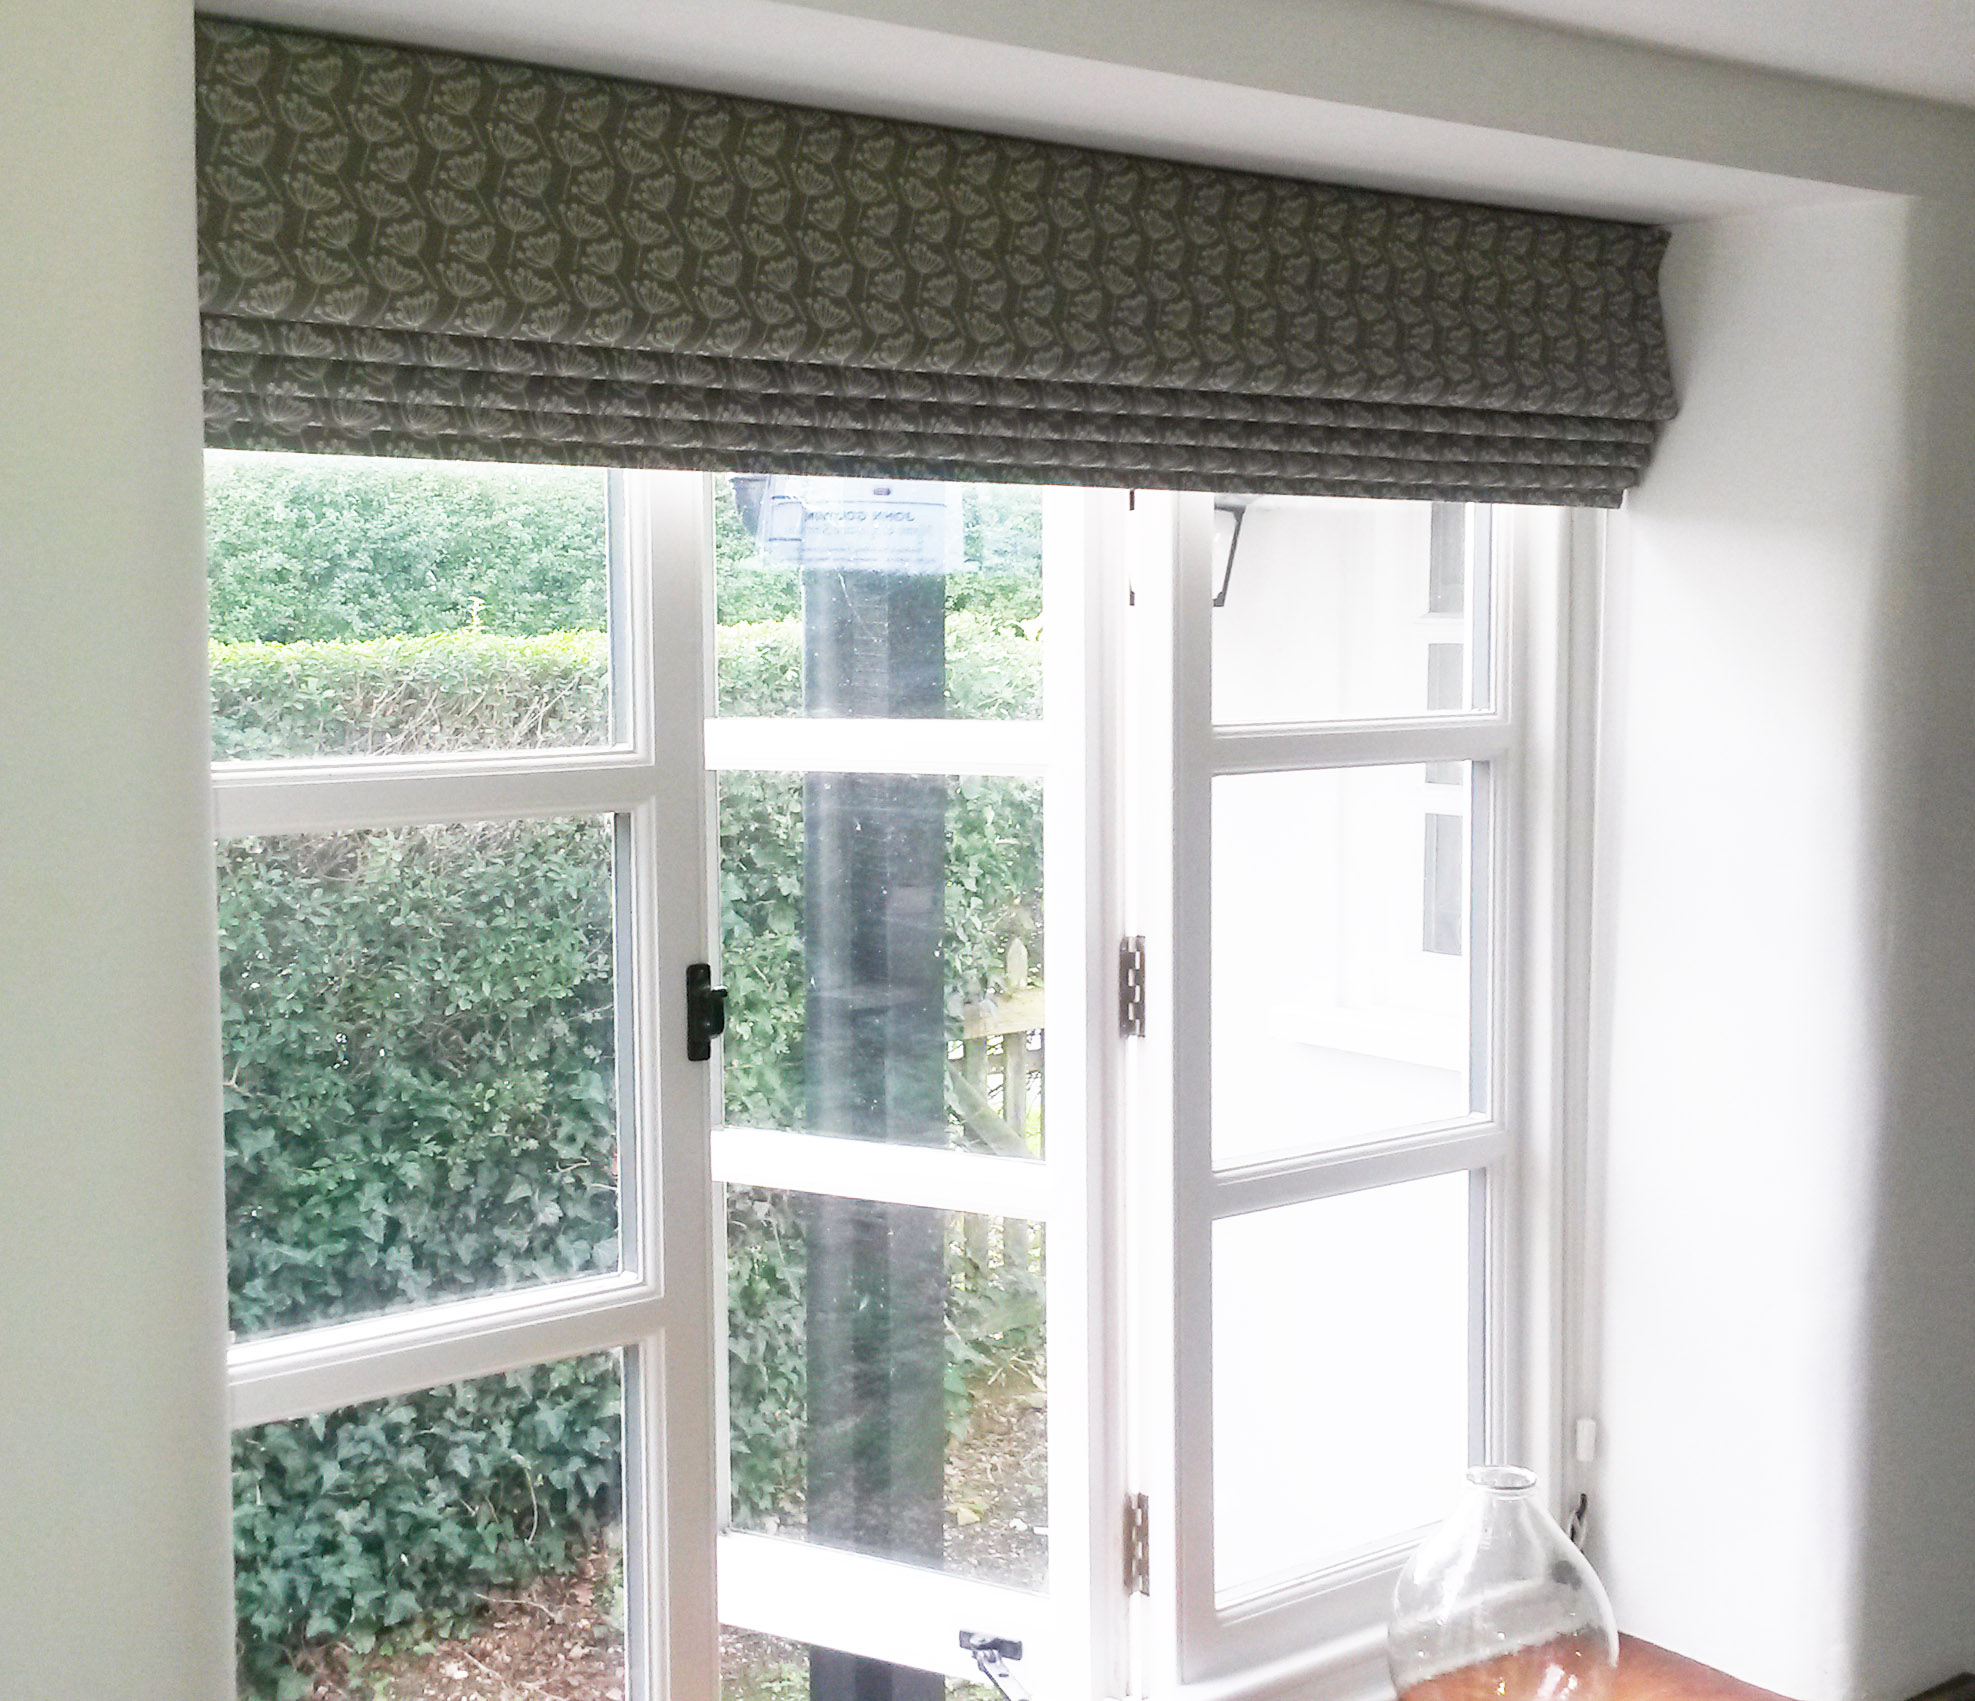 Roman blind in Charlotte Macey Cow Parsley fabric